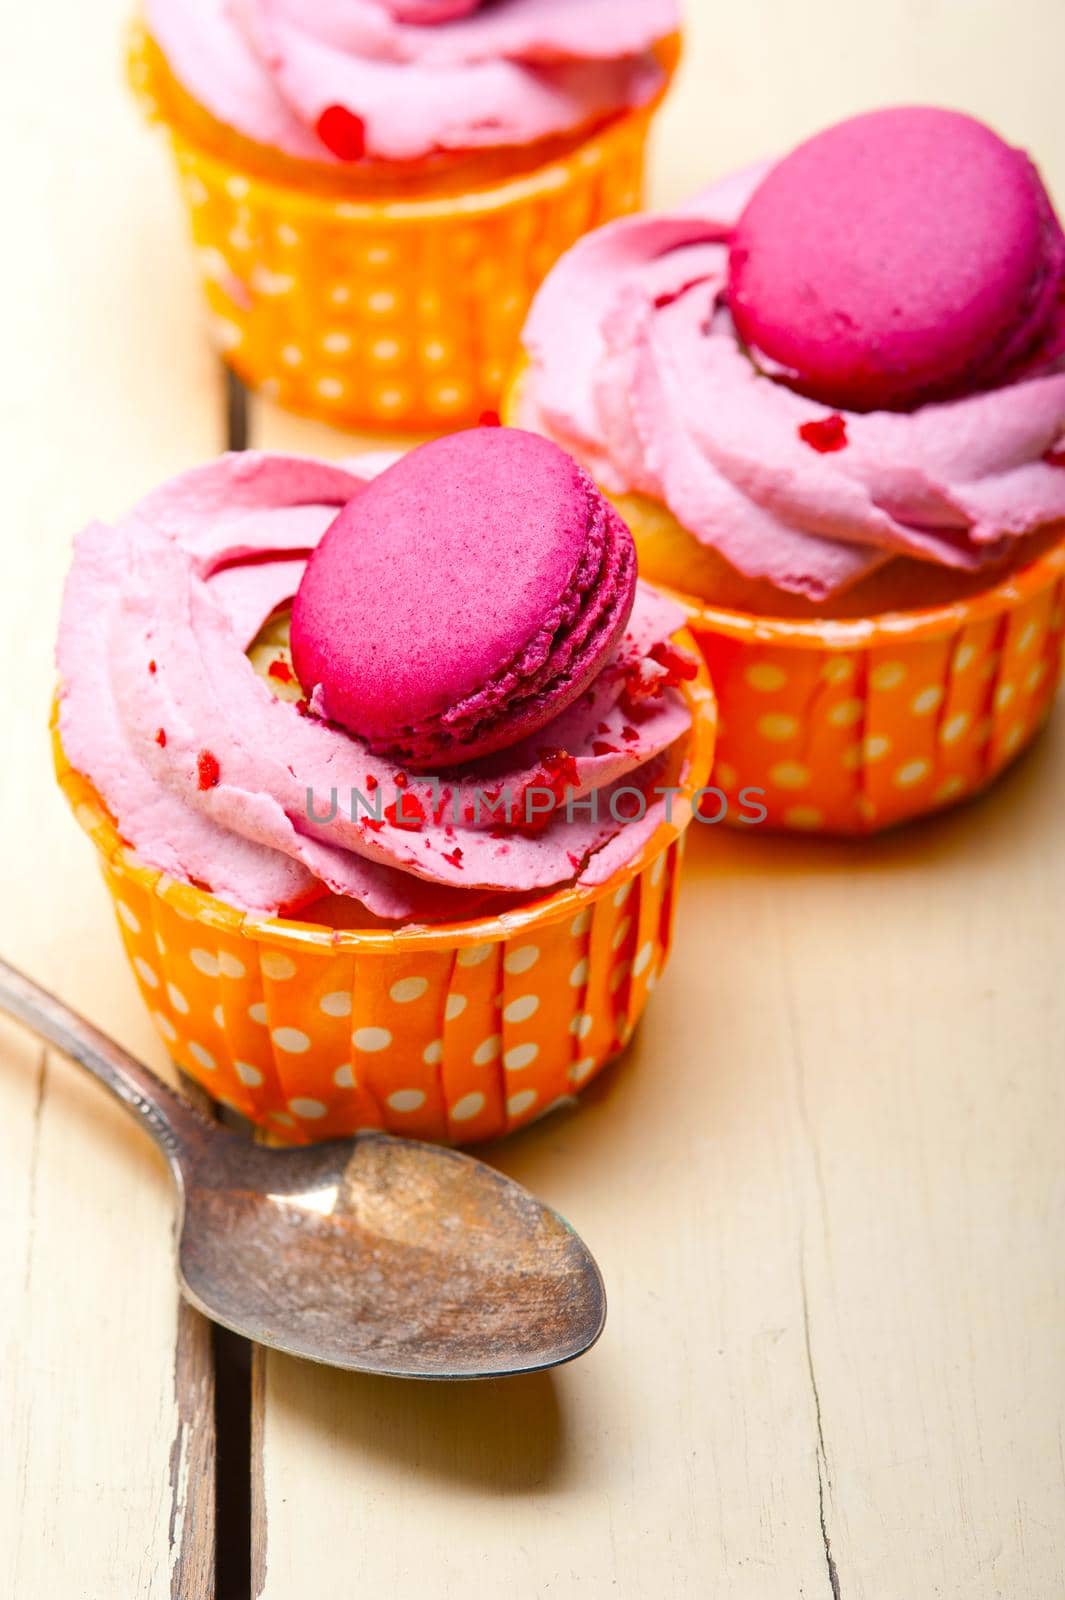 pink berry cream cupcake with macaroon on top by keko64